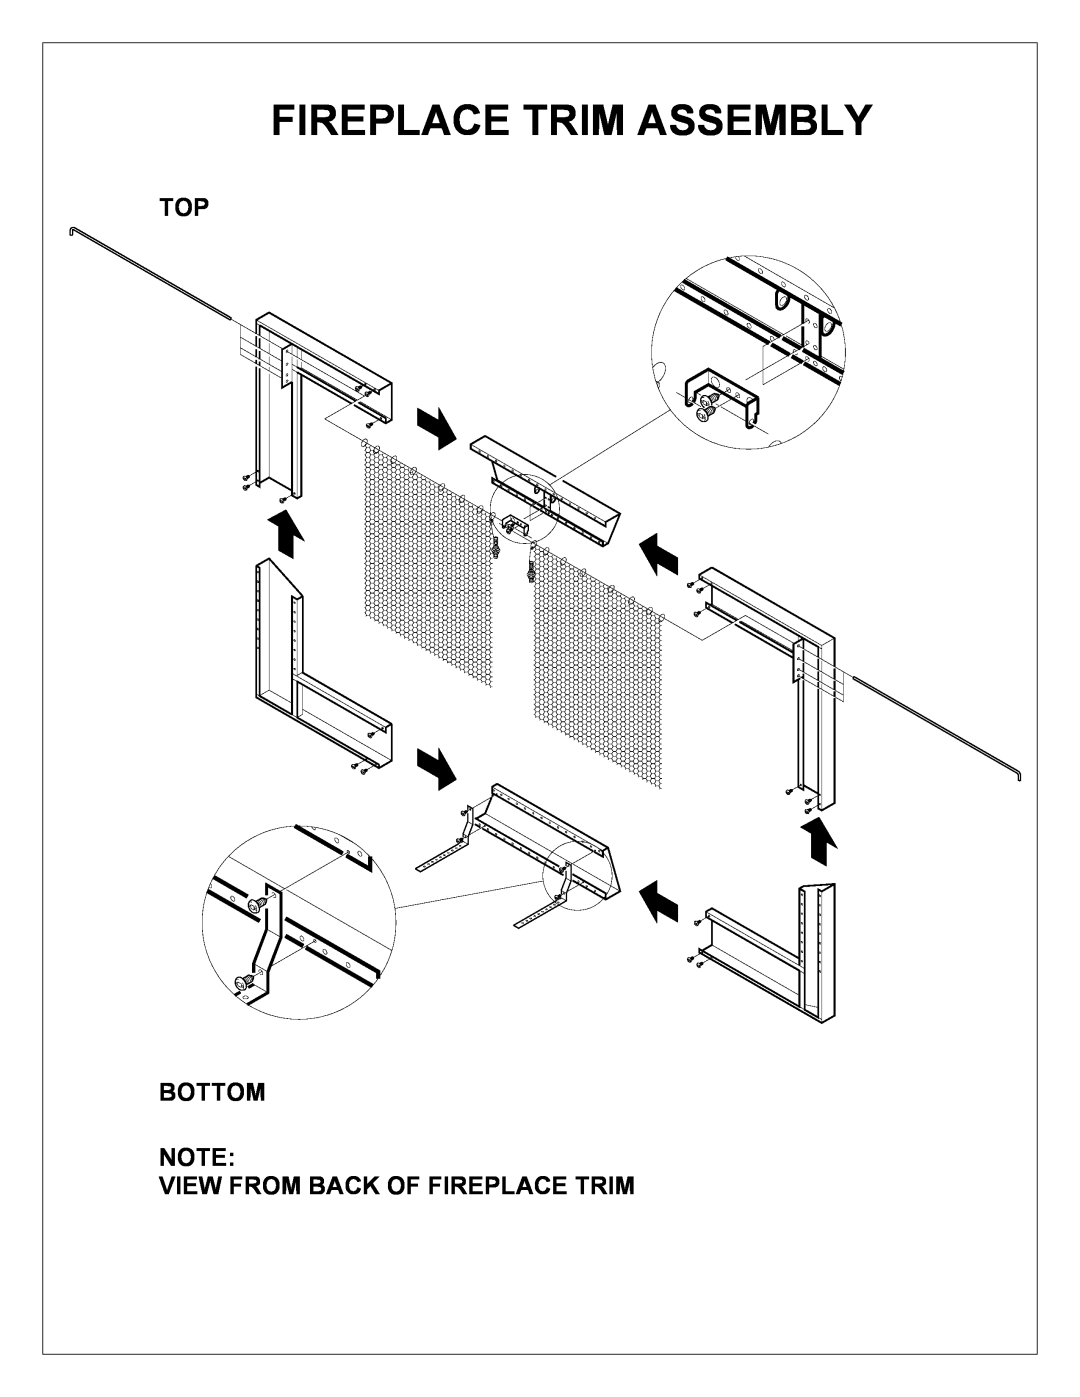 Dimplex DFI23TRIMX manual Fireplace Trim Assembly, Bottom, View From Back Of Fireplace Trim 